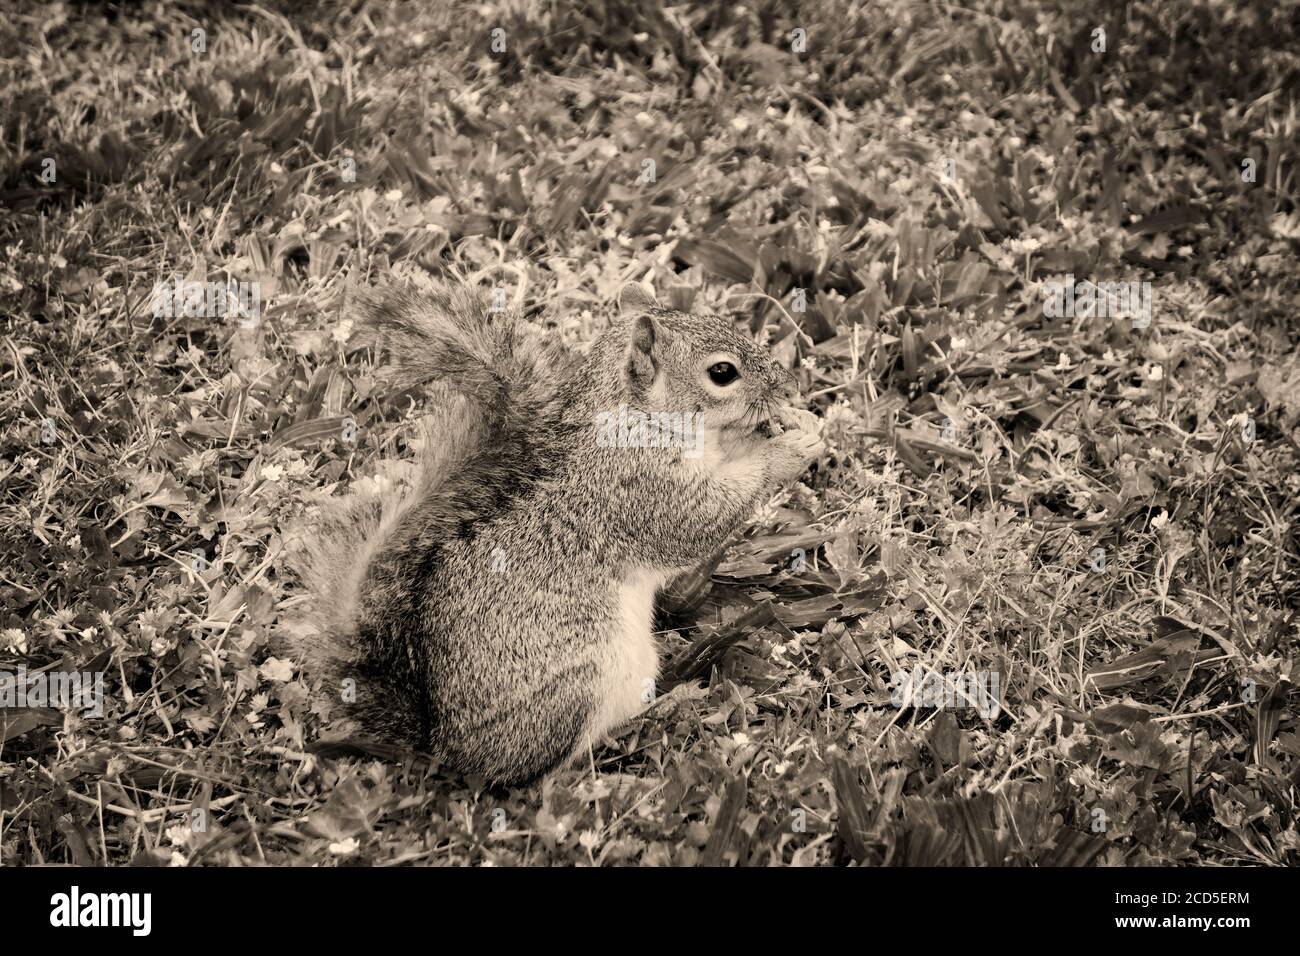 Black and white nature photograph of squirrel eating nut on grass Stock Photo